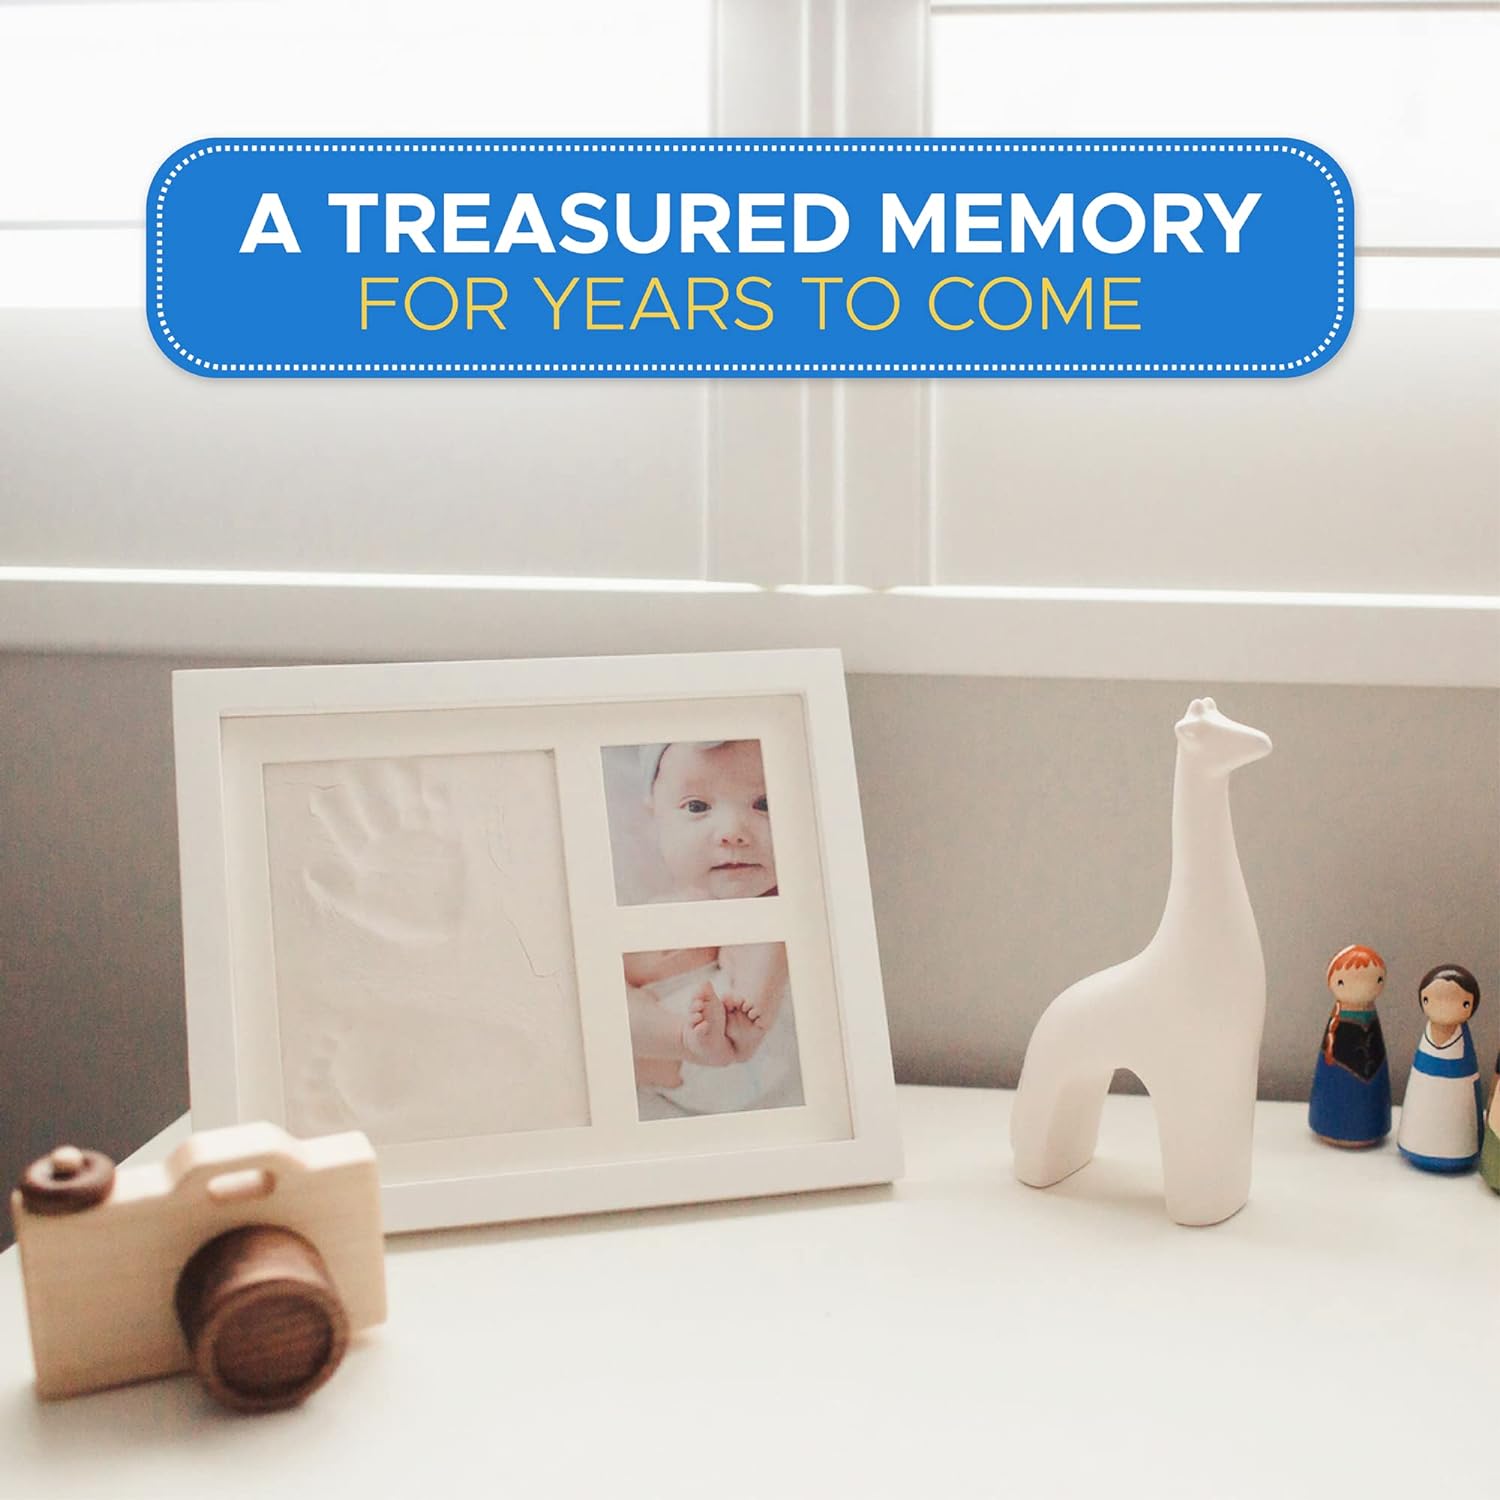 The life print : Baby Hand and Footprint Kit in Adorable Keepsake Frame – Perfect Baby Shower Gift and Nursery Decor!